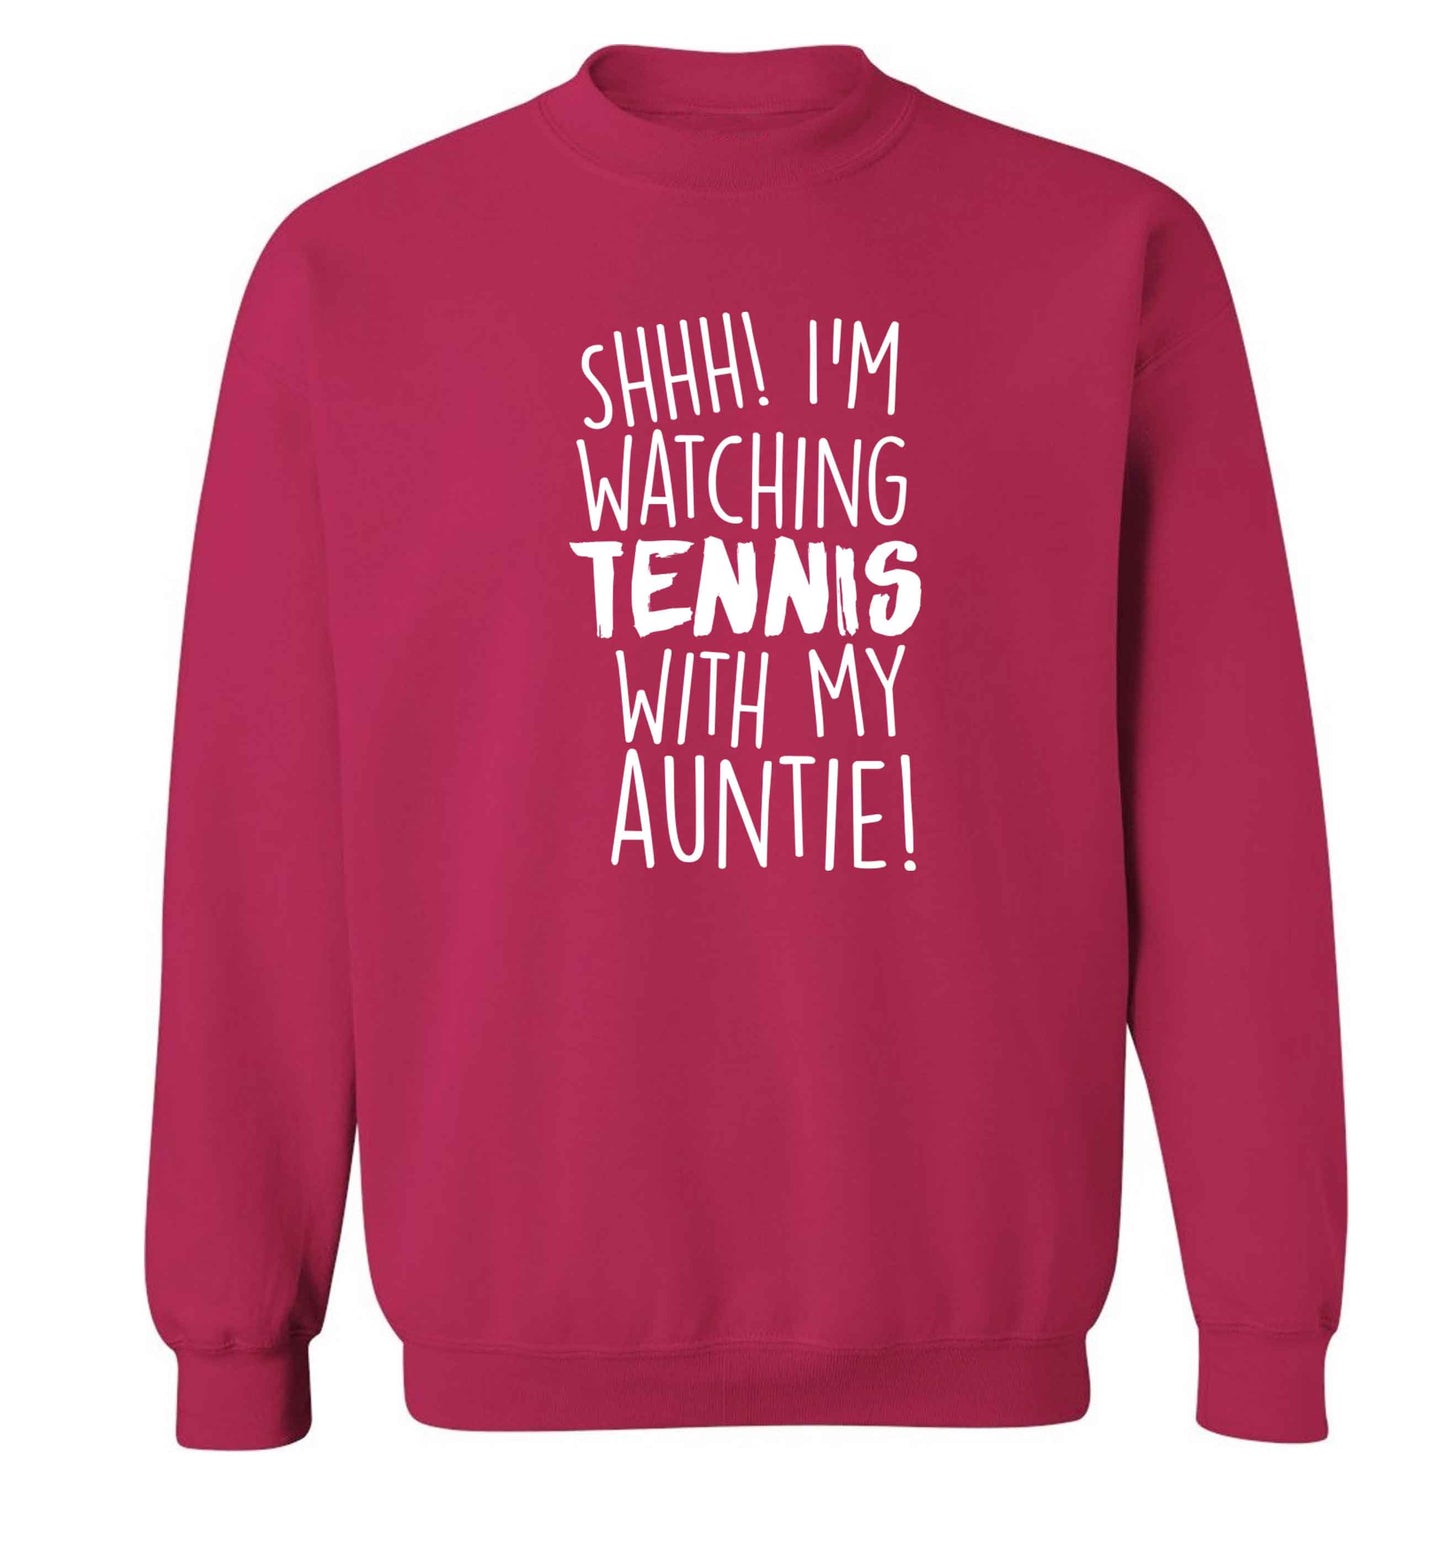 Shh! I'm watching tennis with my auntie! Adult's unisex pink Sweater 2XL